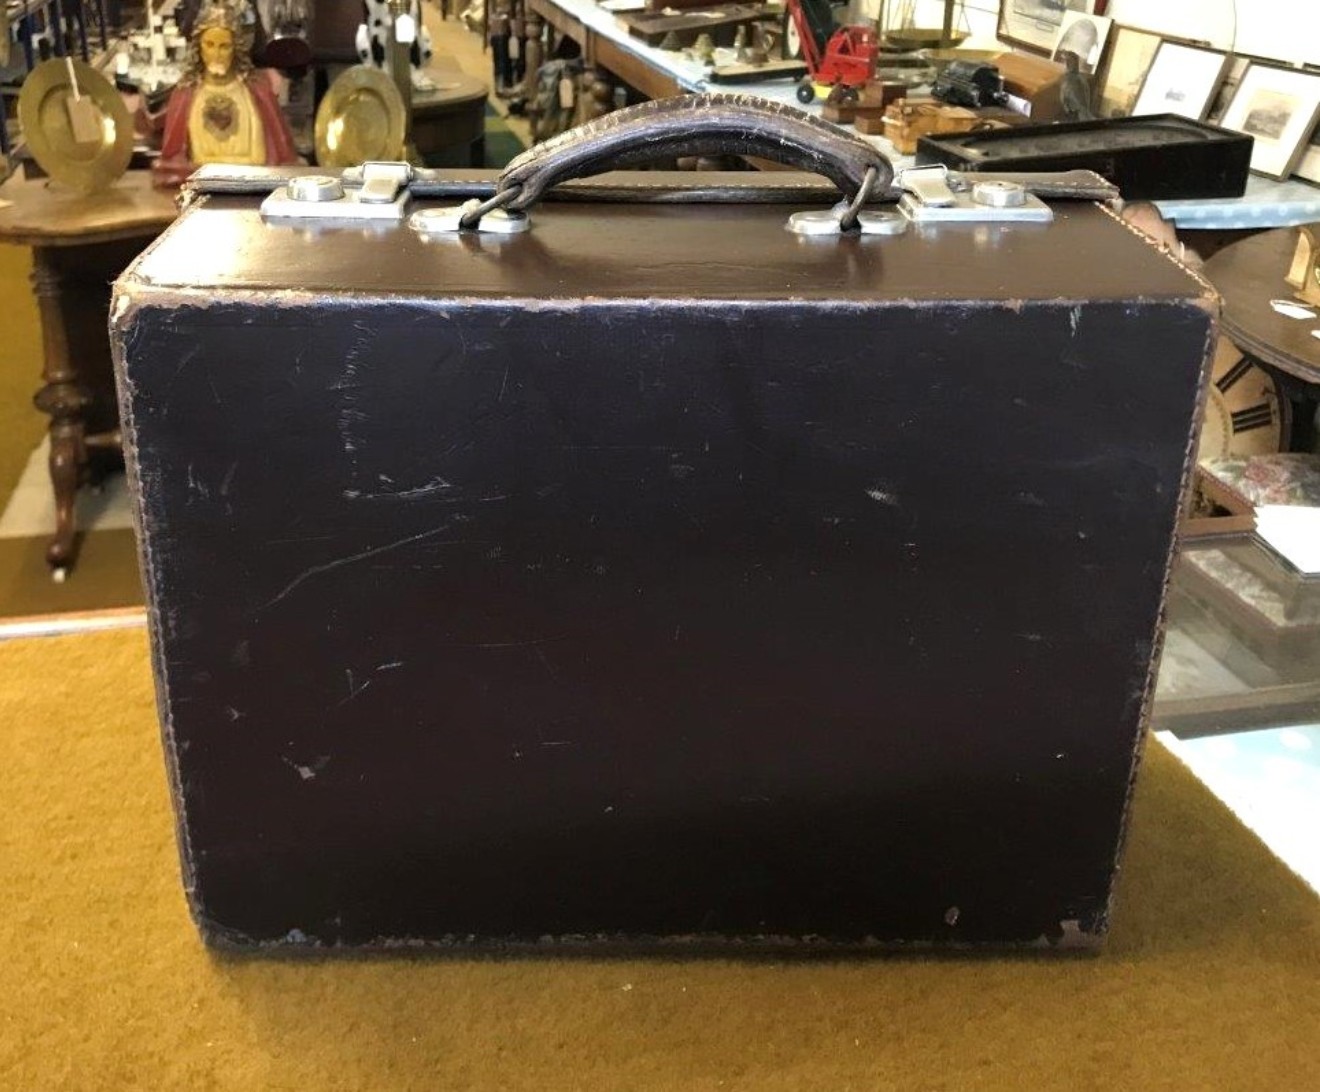 Vintage Doctor's Traveling Instrument Case and Instruments